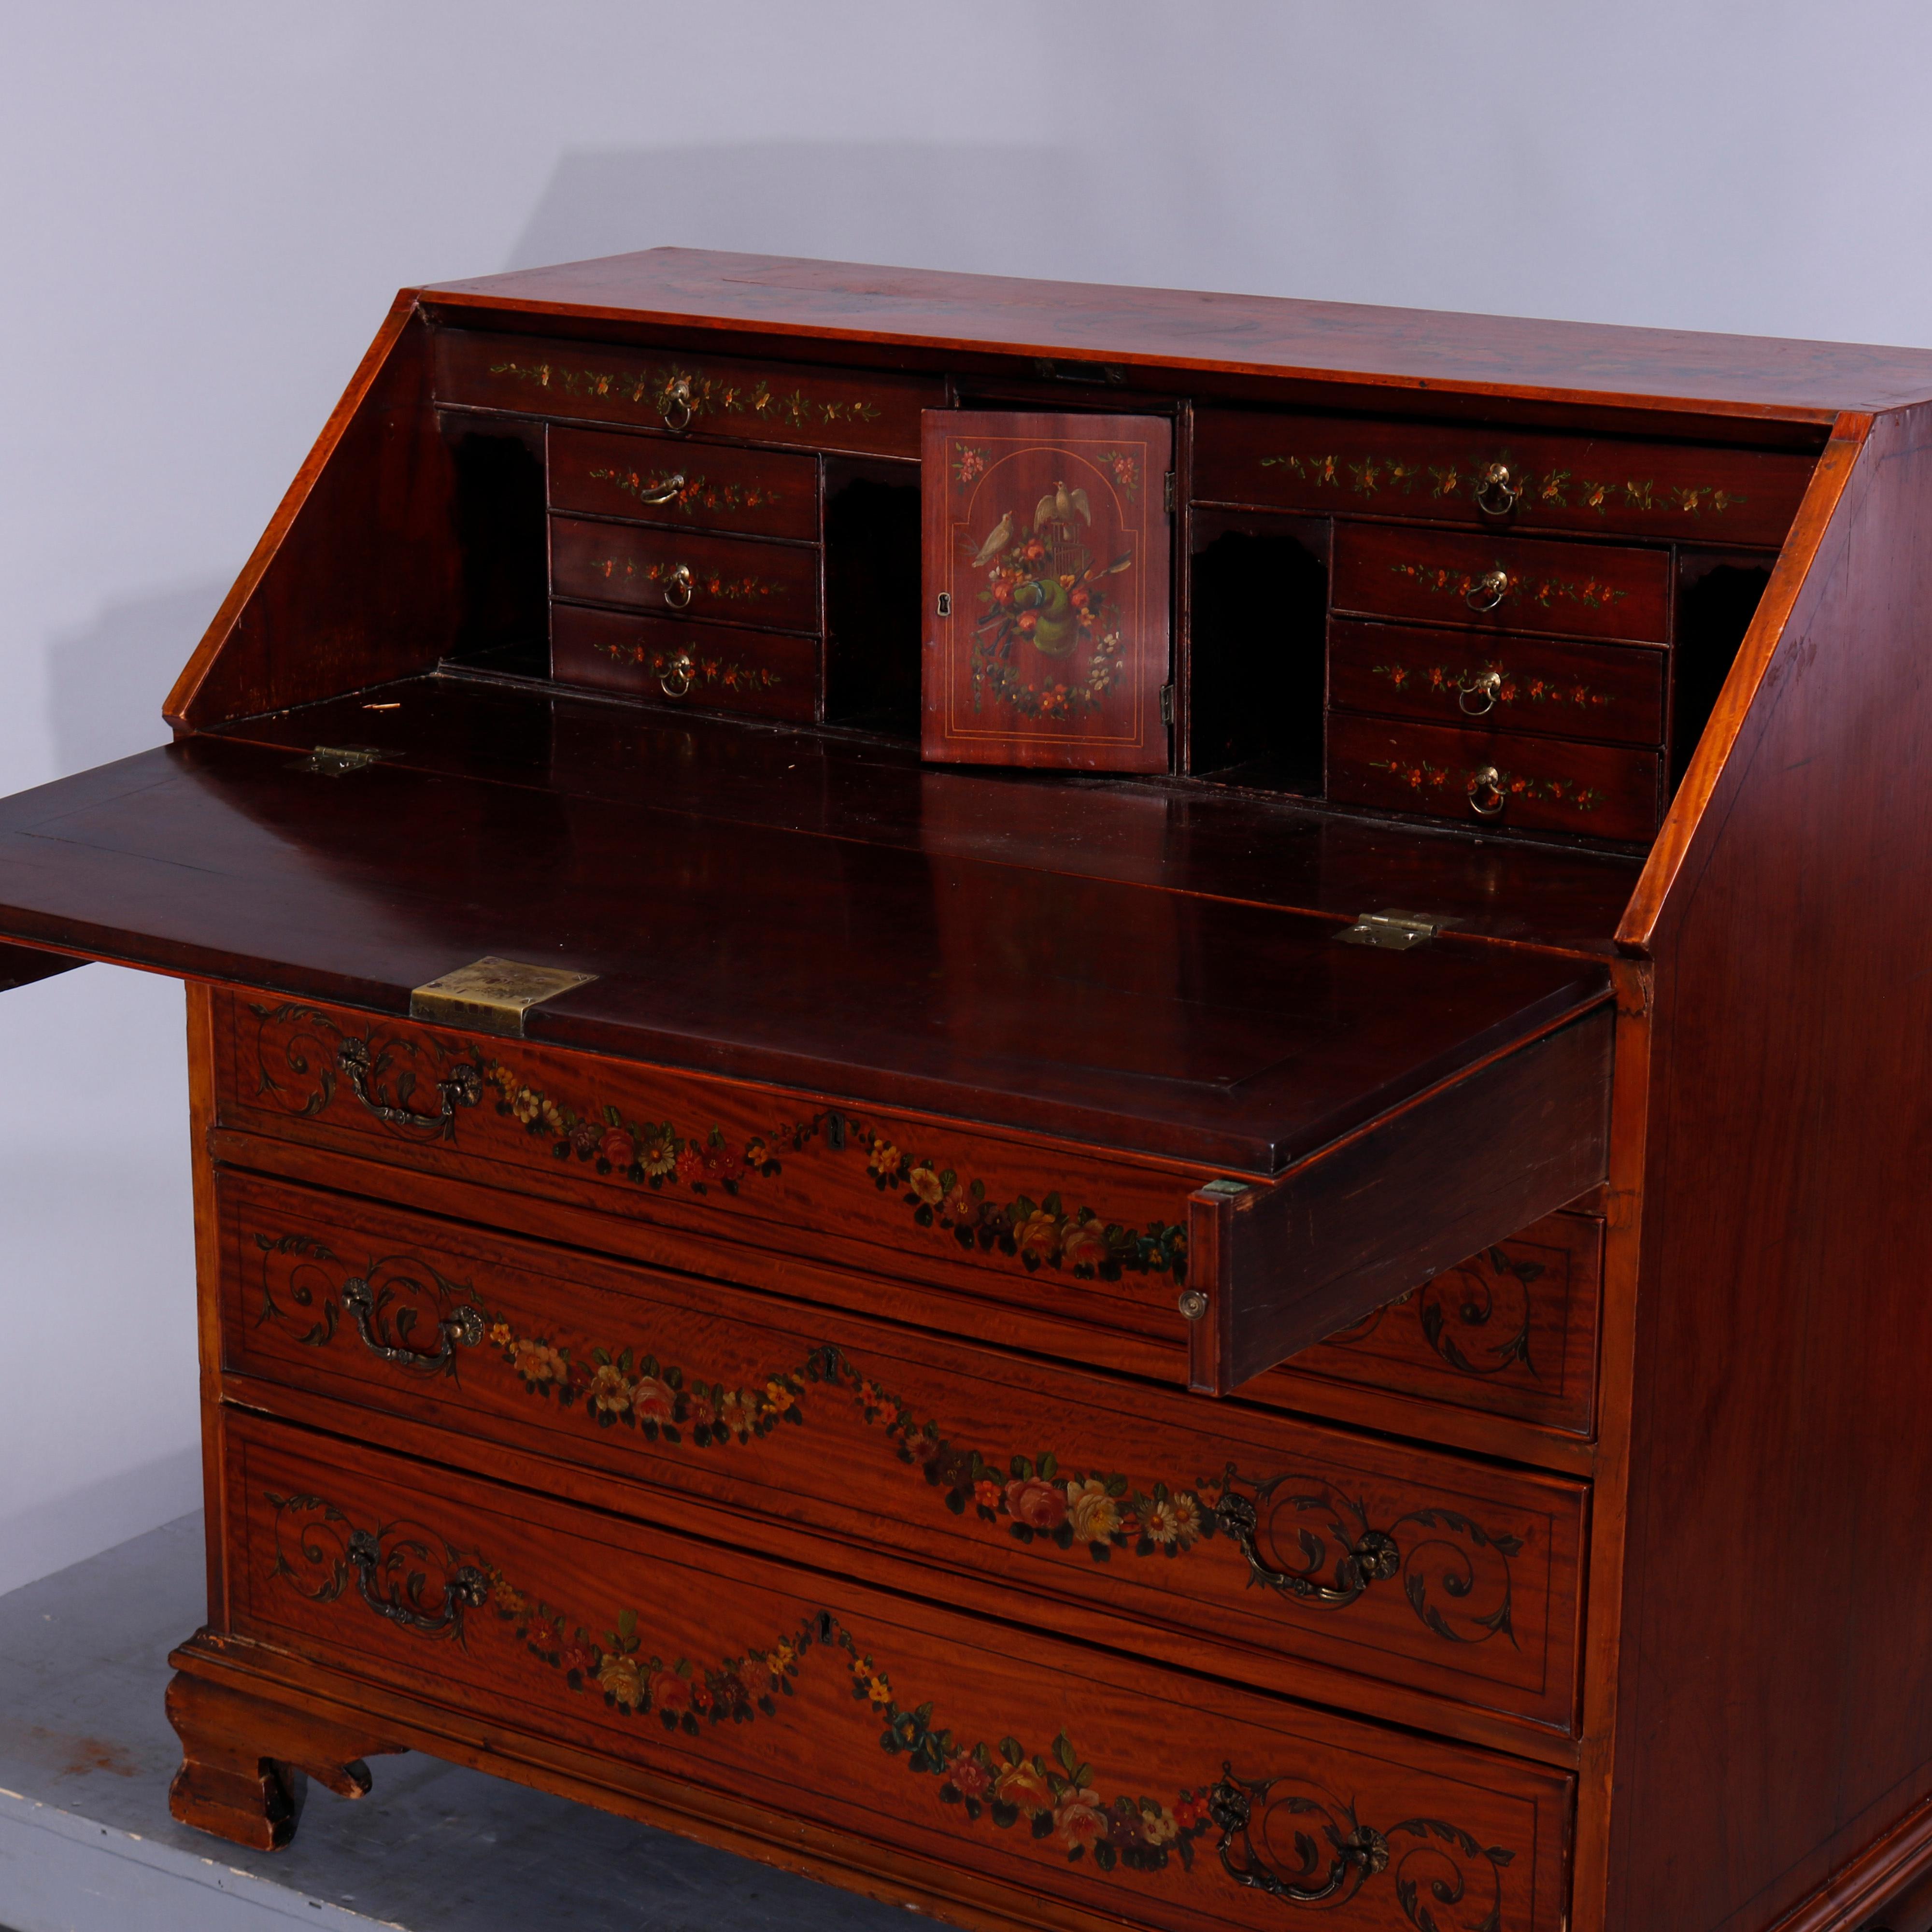 Wood Antique English Adams Decorated Satinwood Drop-Front Desk, 18th-19th C For Sale